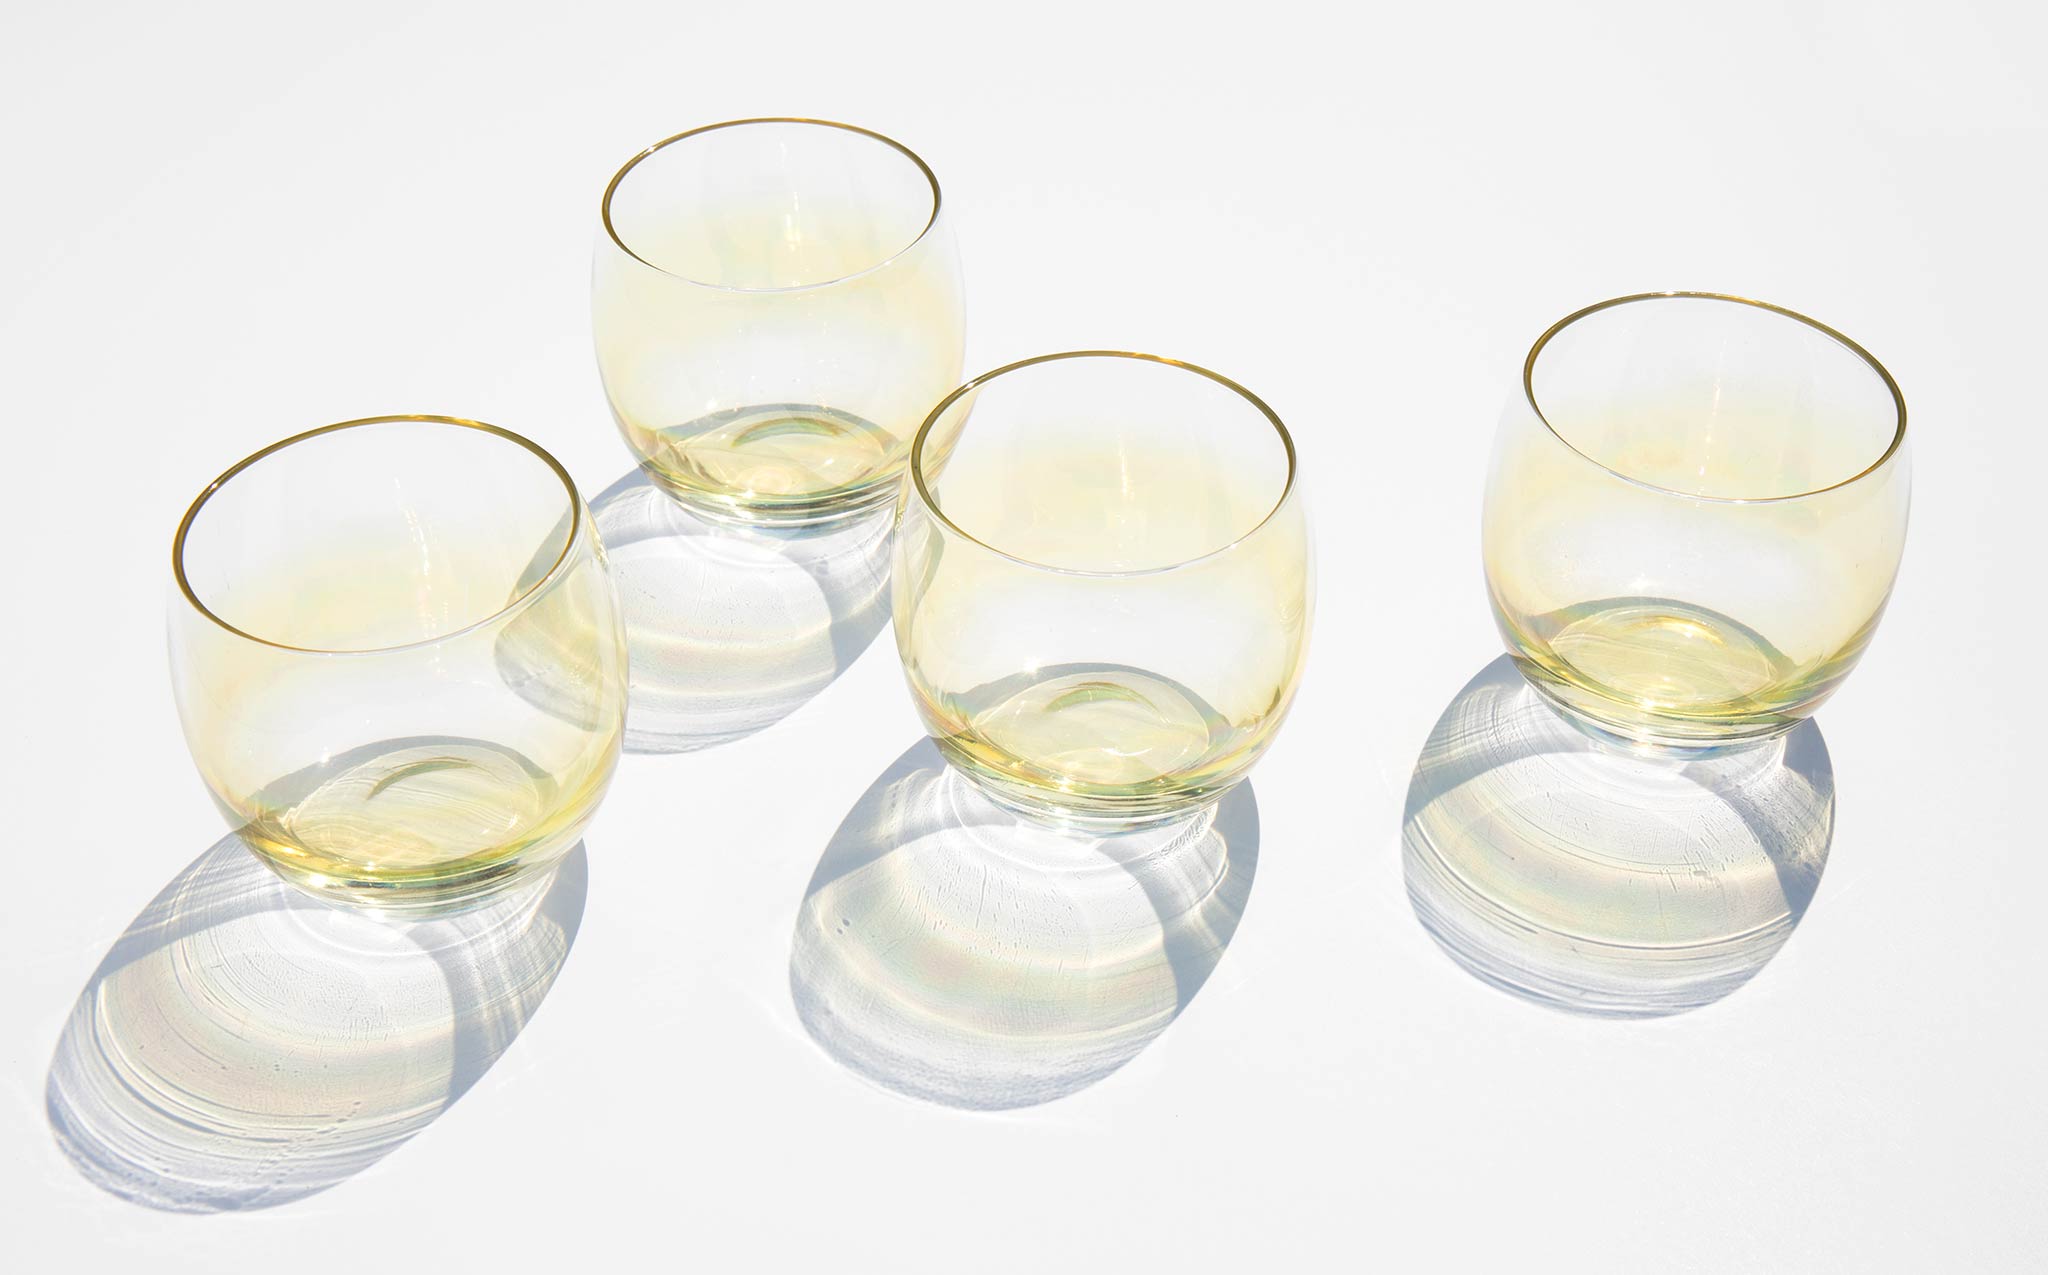 Sunshine Yellow Roly Poly Cocktail Glasses